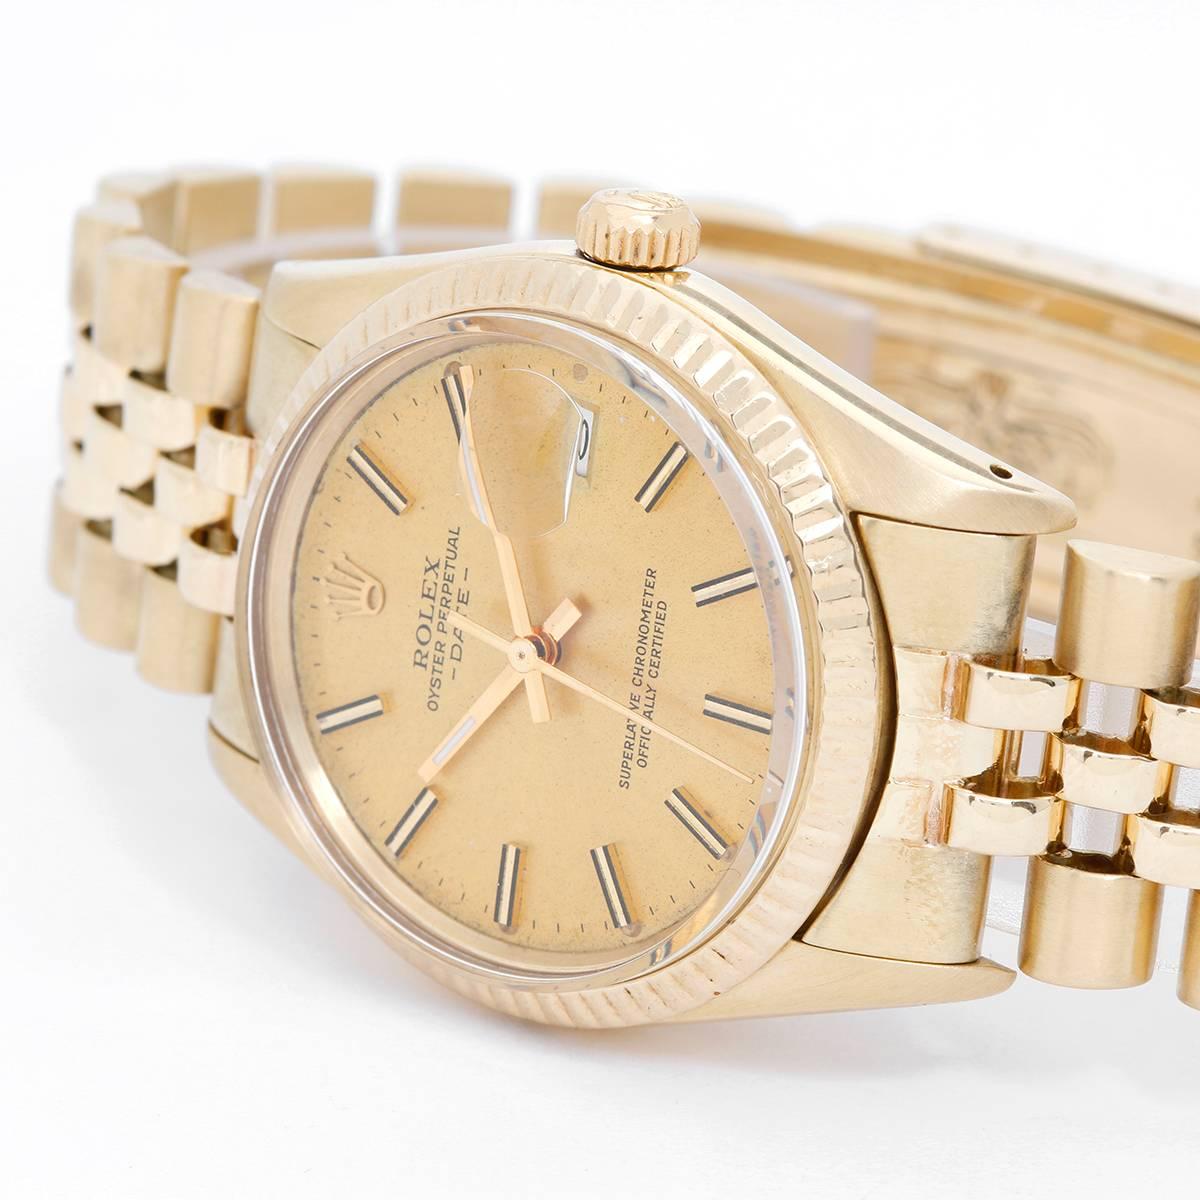 Rolex Date Men's 14k Yellow Gold Watch -  Automatic winding. 14k yellow gold (34mm diameter). Champagne dial with  stick markers. 14k Jubilee  Yellow gold bracelet. Pre-owned with box.